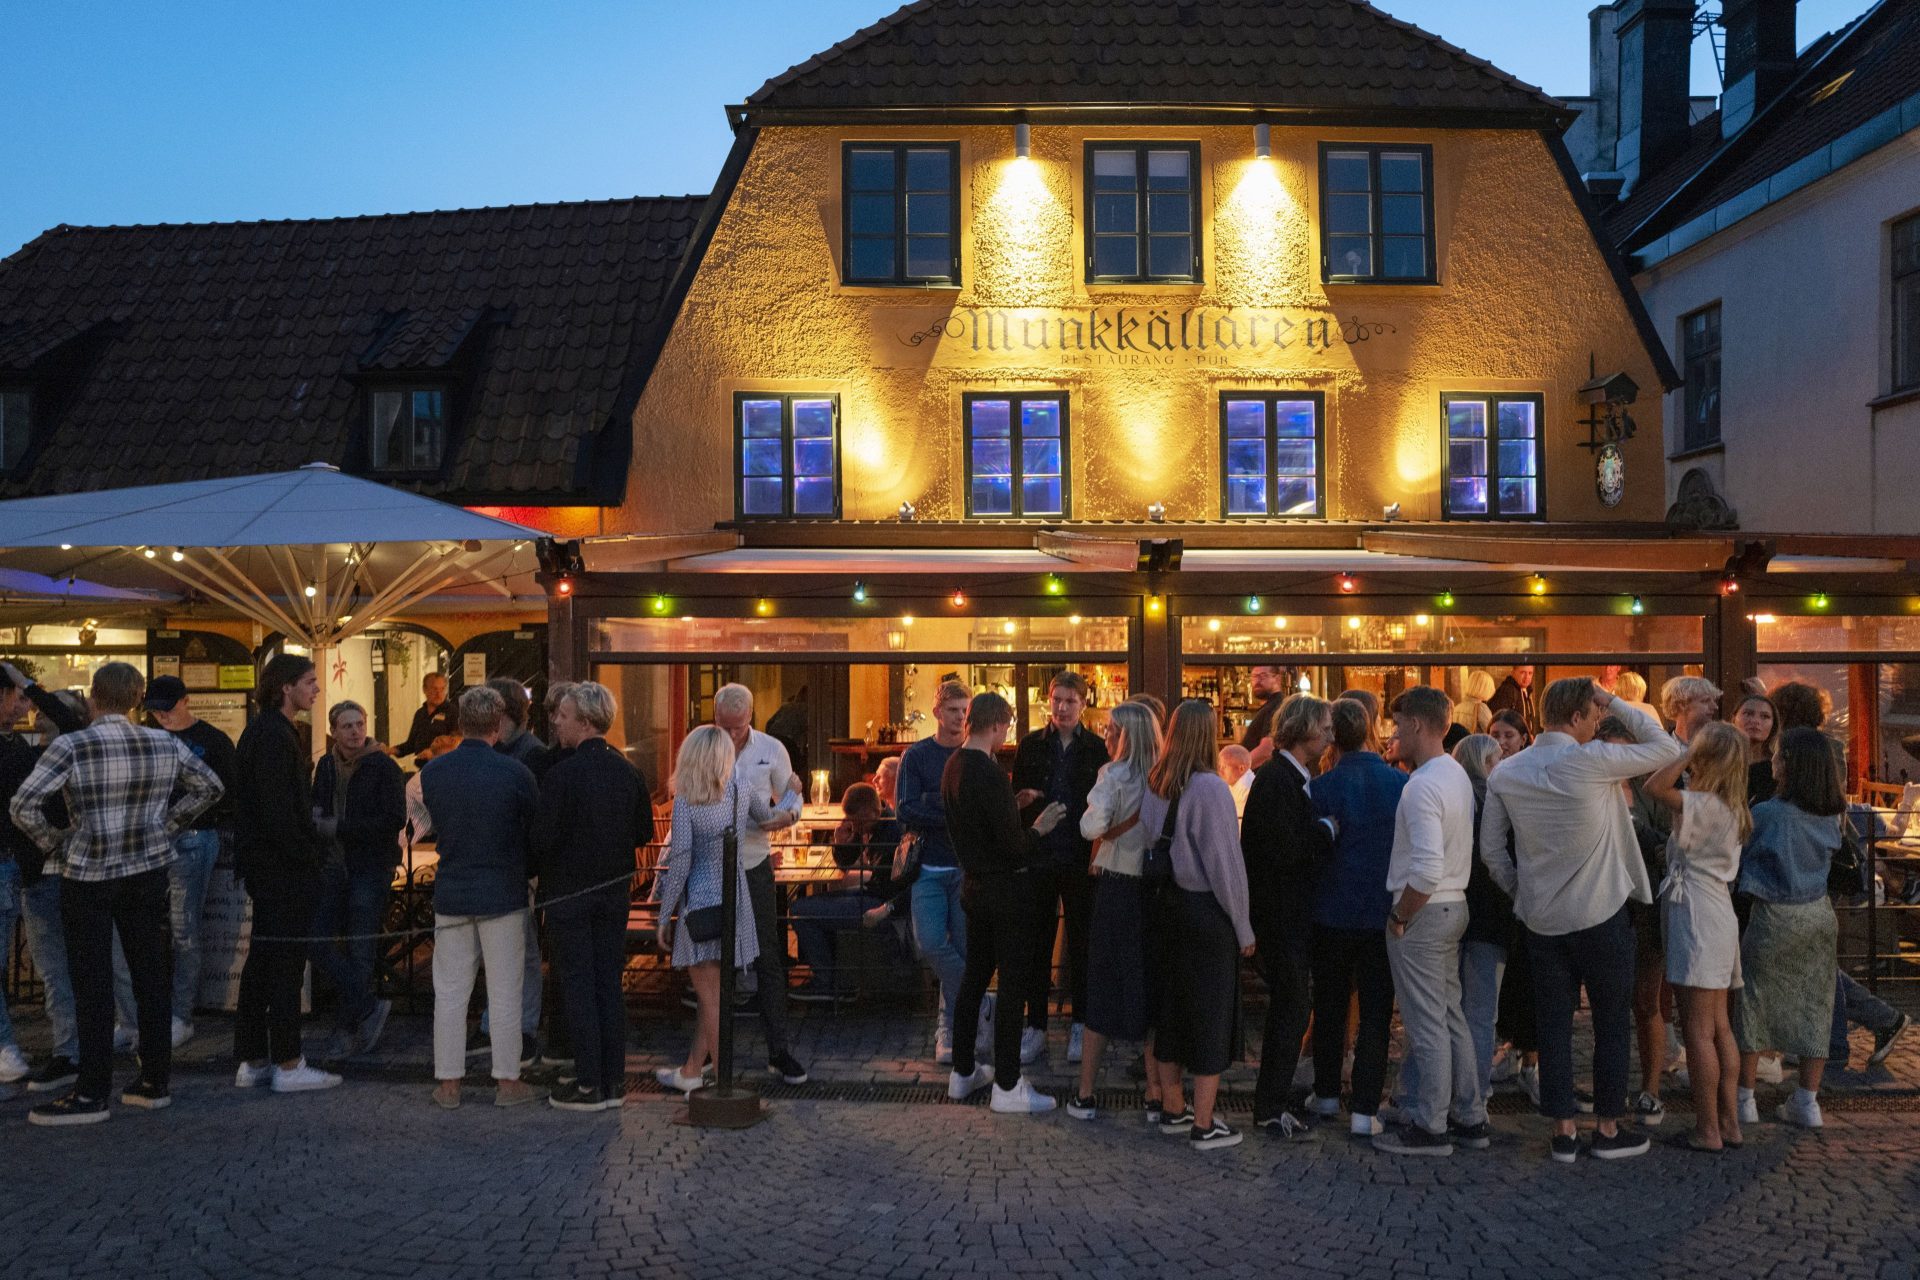 Sweden has not closed bars and restaurants during the pandemic. The result has been more cases of coronavirus infection. But far fewer people are immune than would be needed for Sweden to achieve herd immunity.